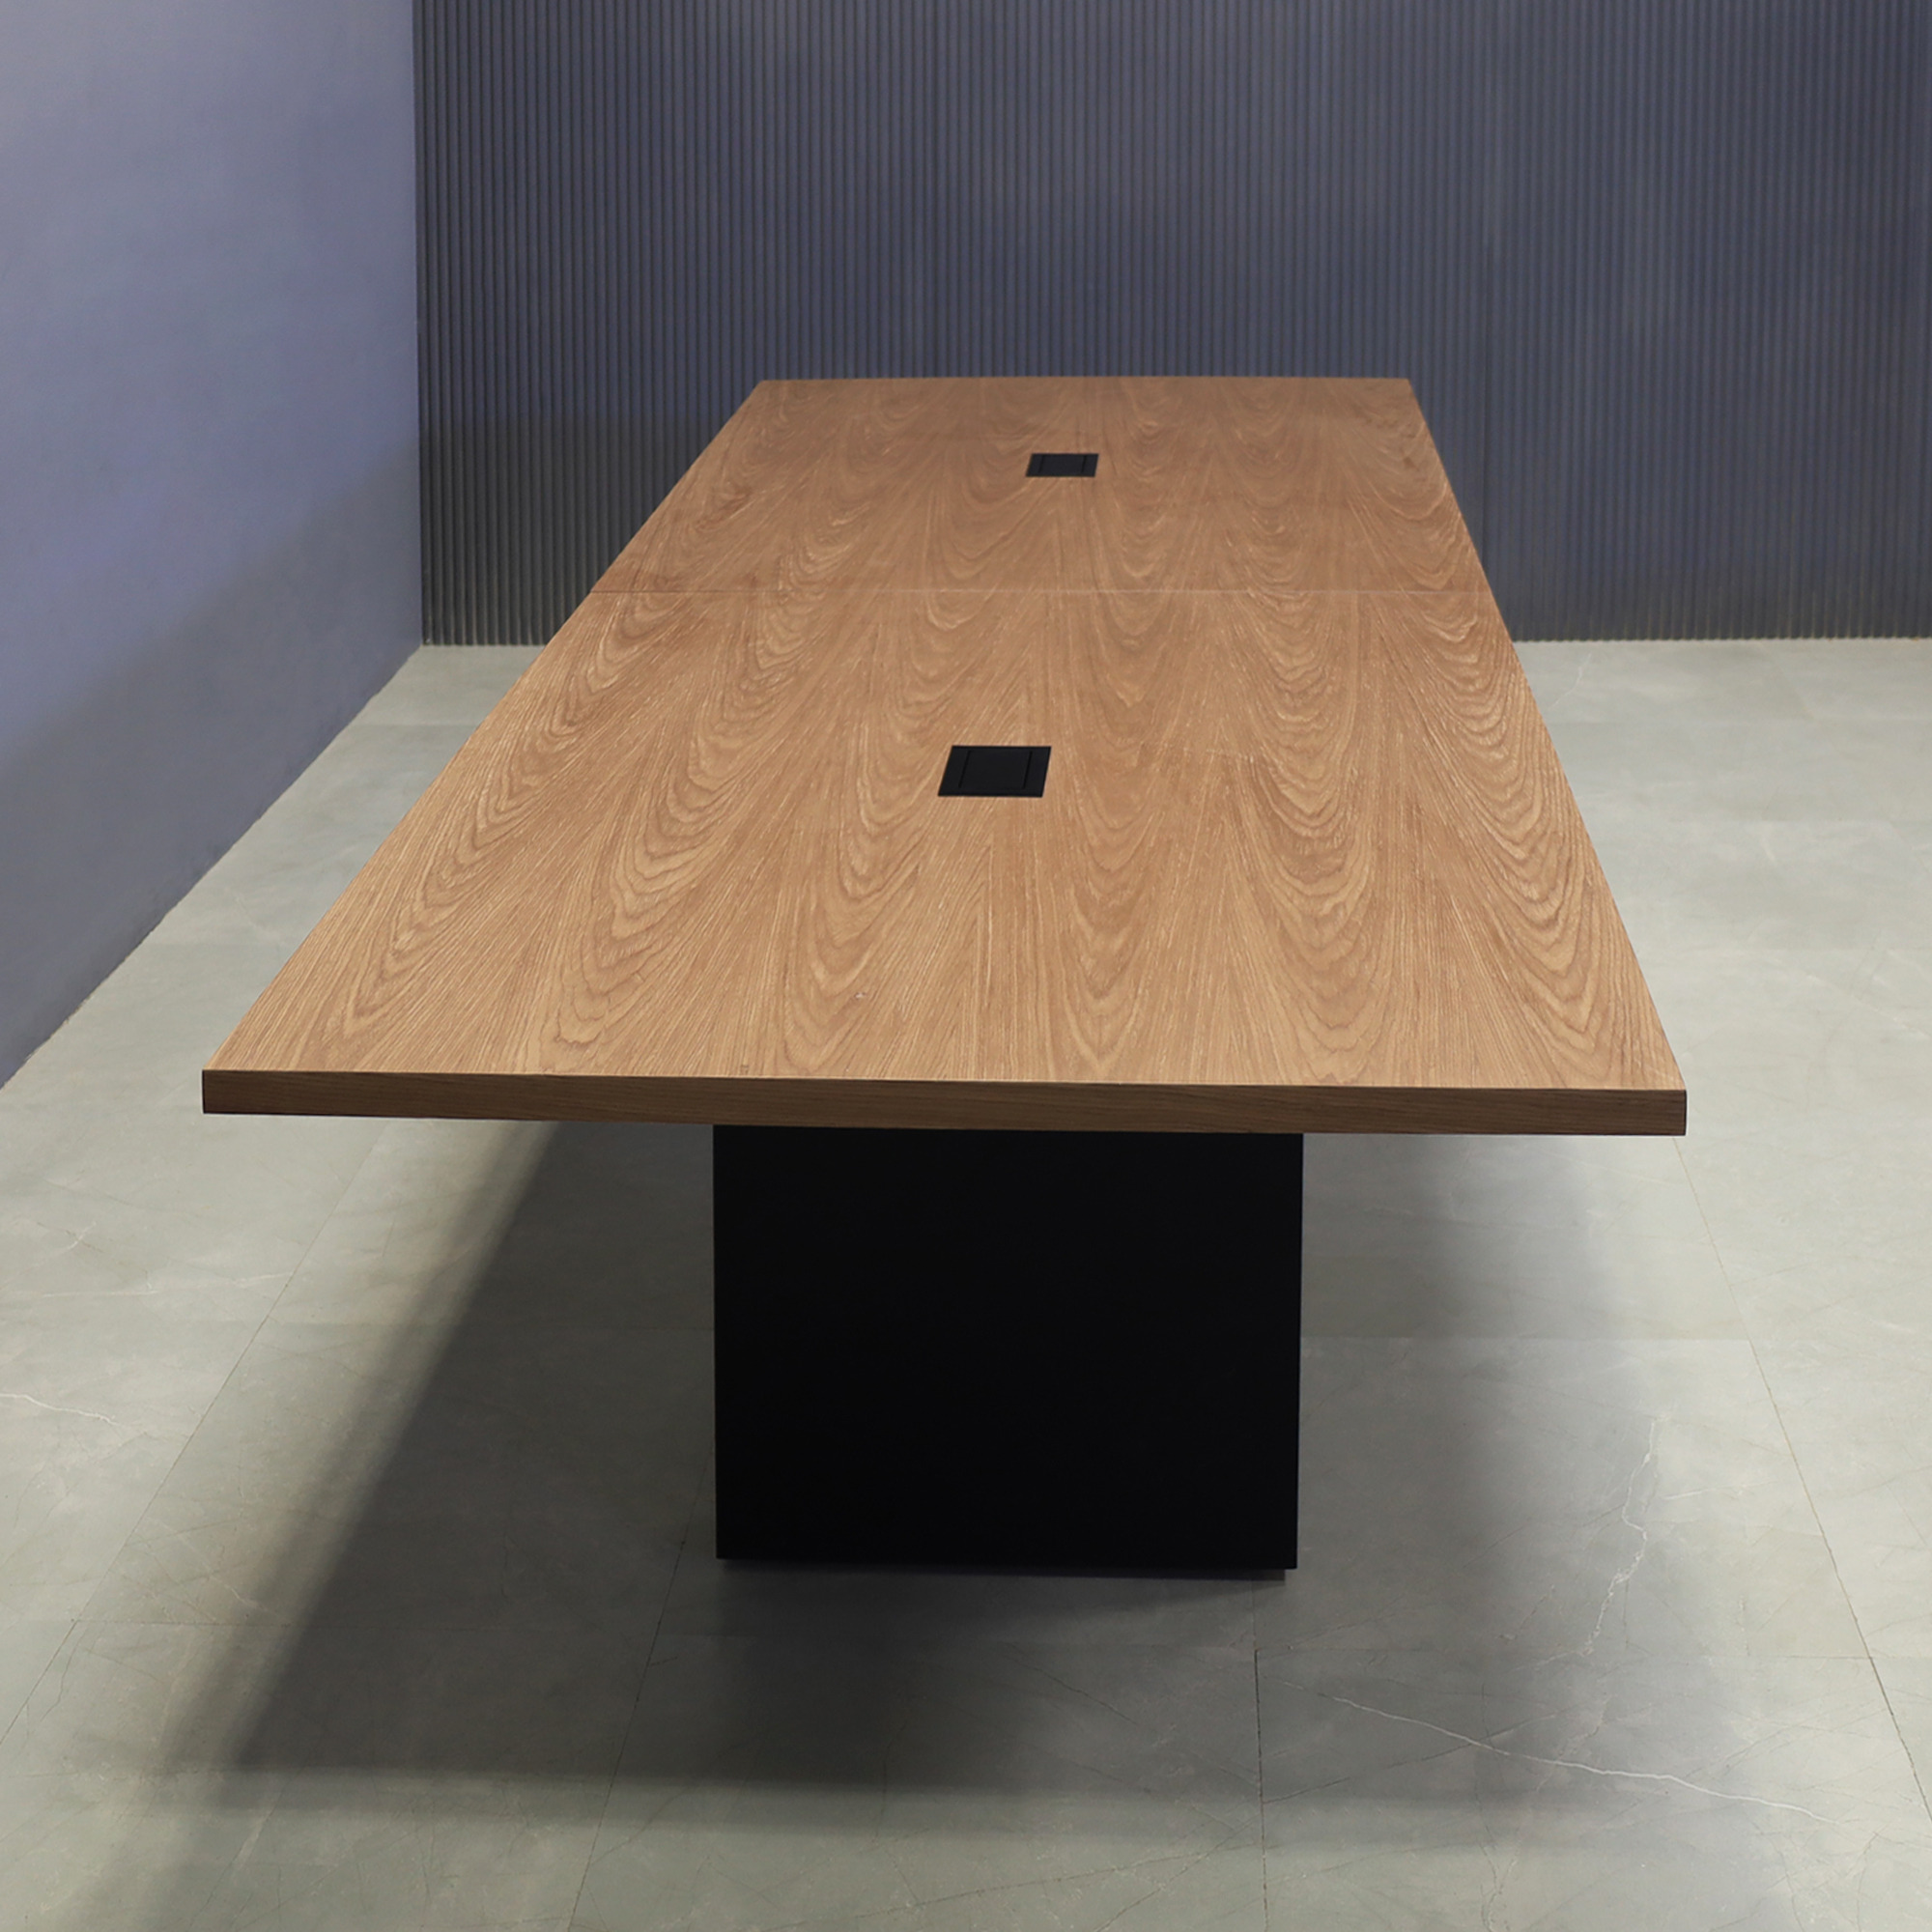 120-inch Newton Rectangular Conference Table in walnut laminate top and black matte laminate base, with 2 black MX2 powerboxes, shown here.